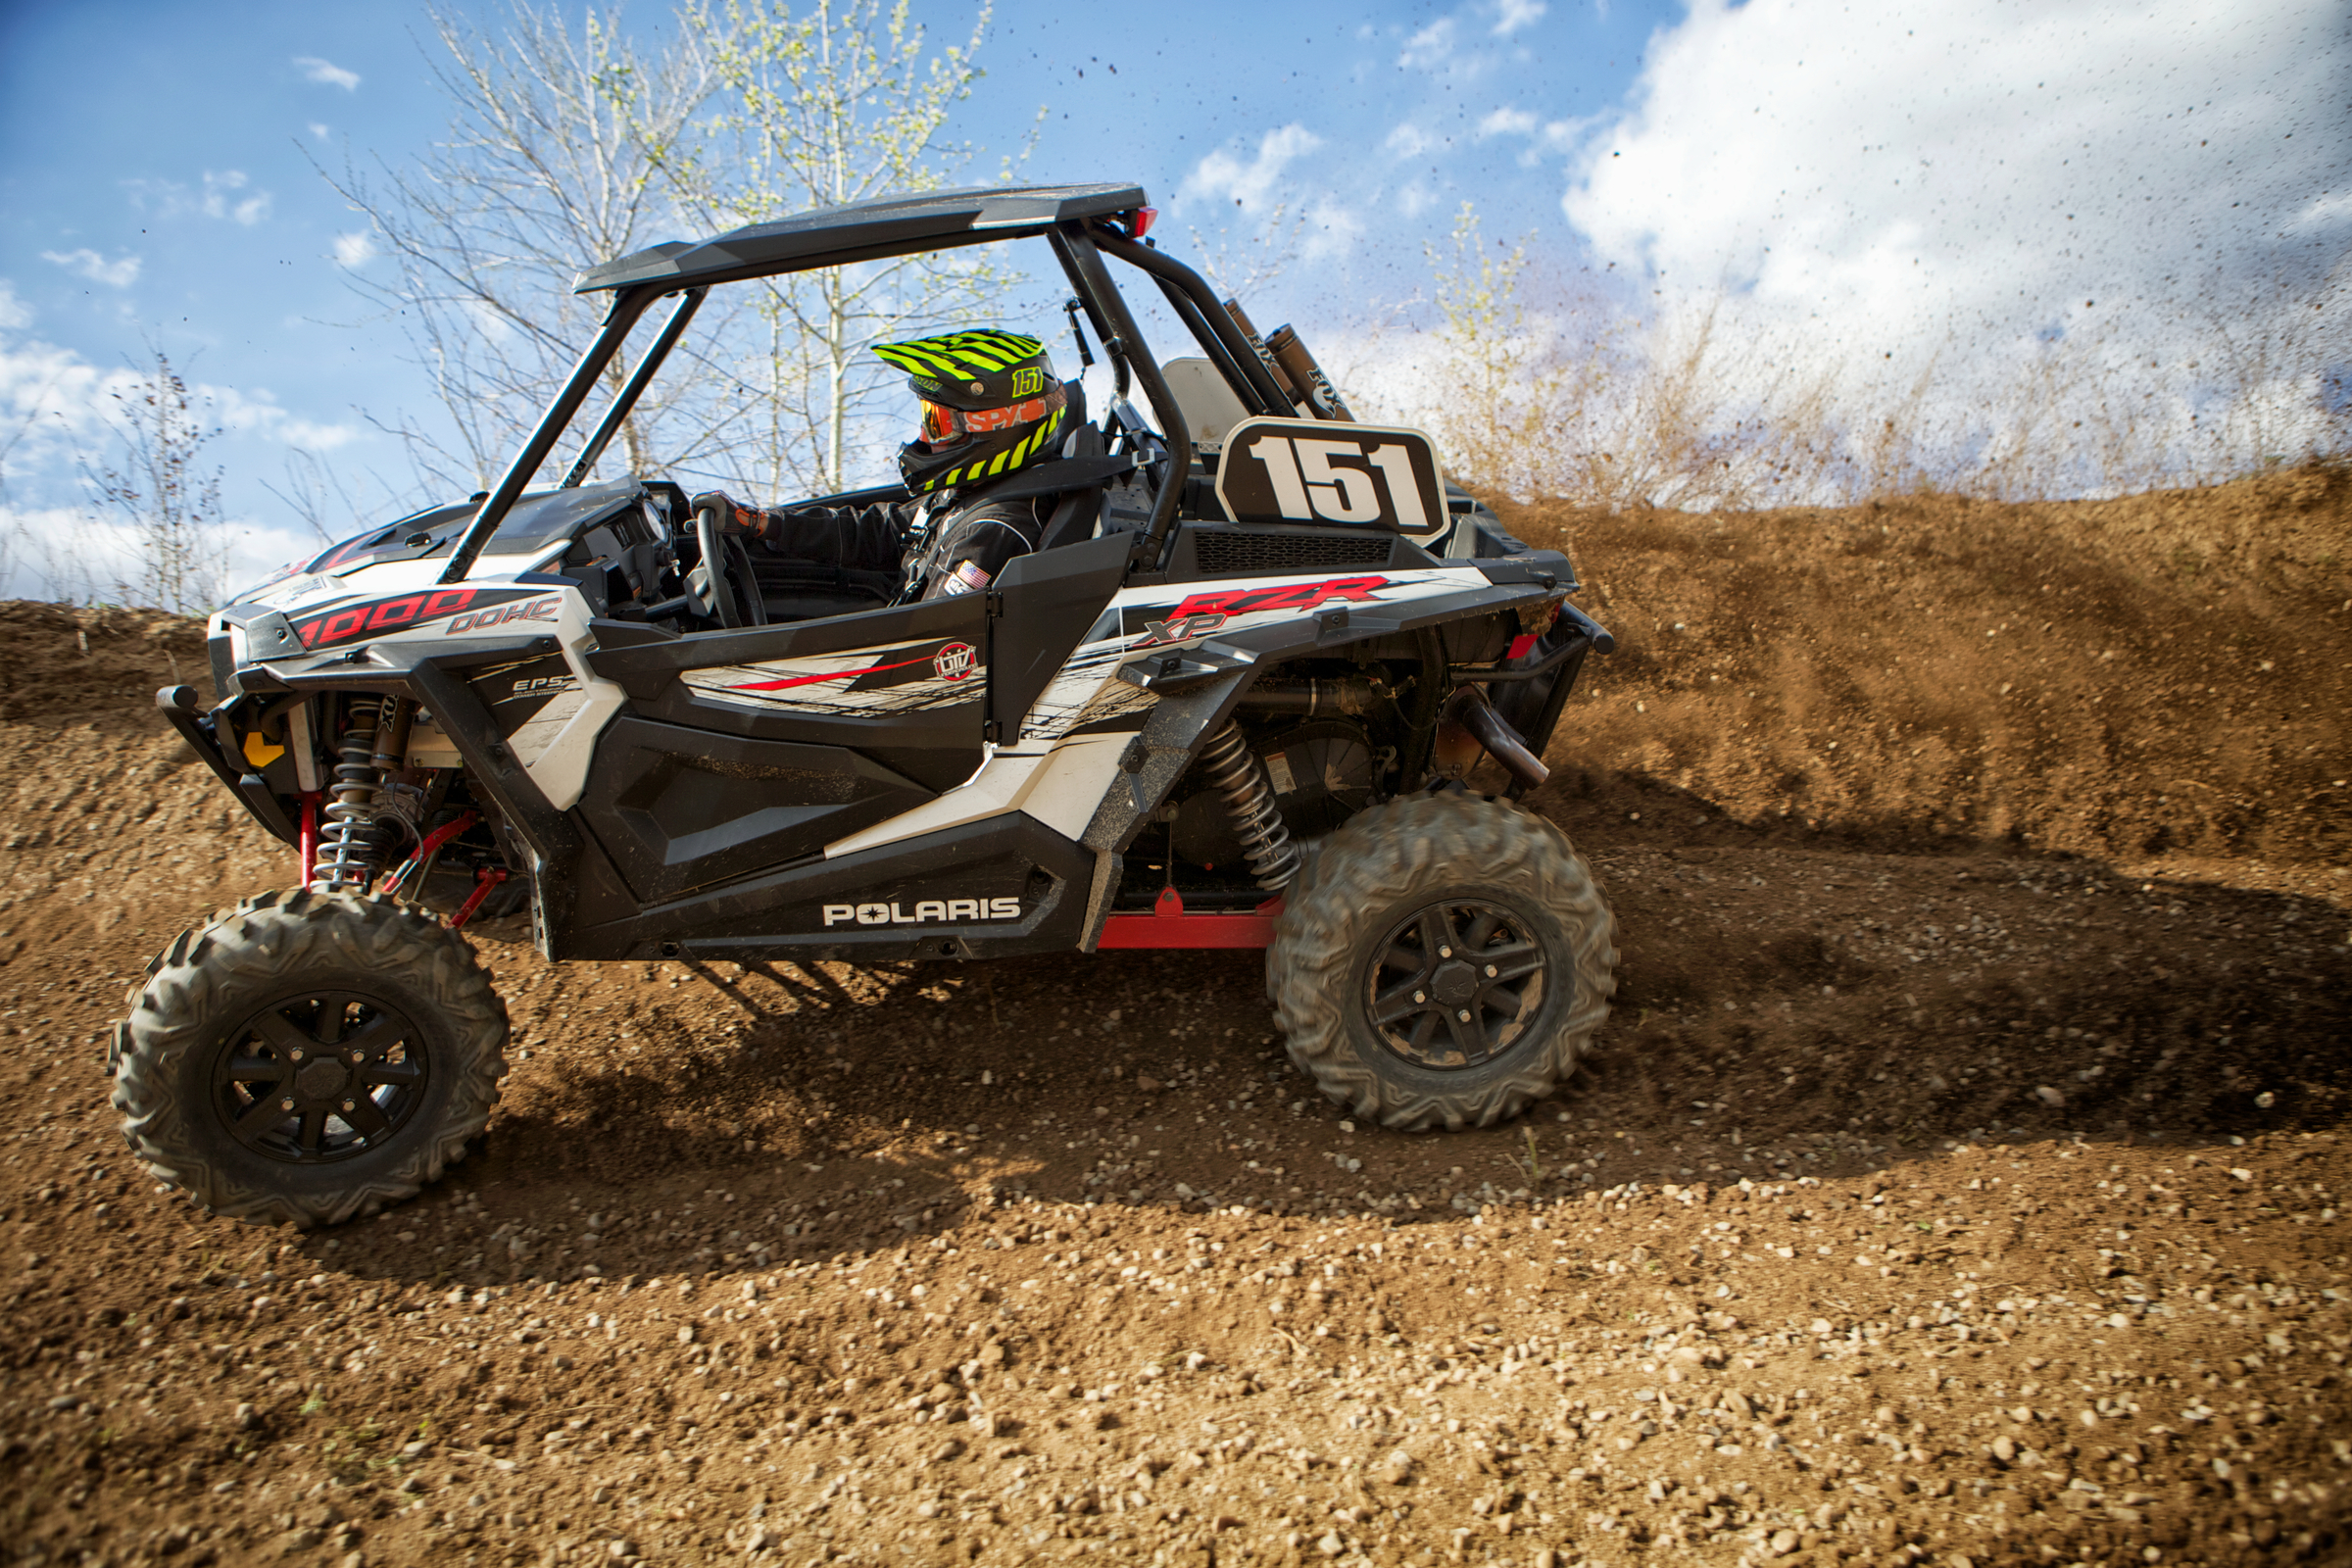 ERX: The Twin Cities Ultimate Off-Road race track